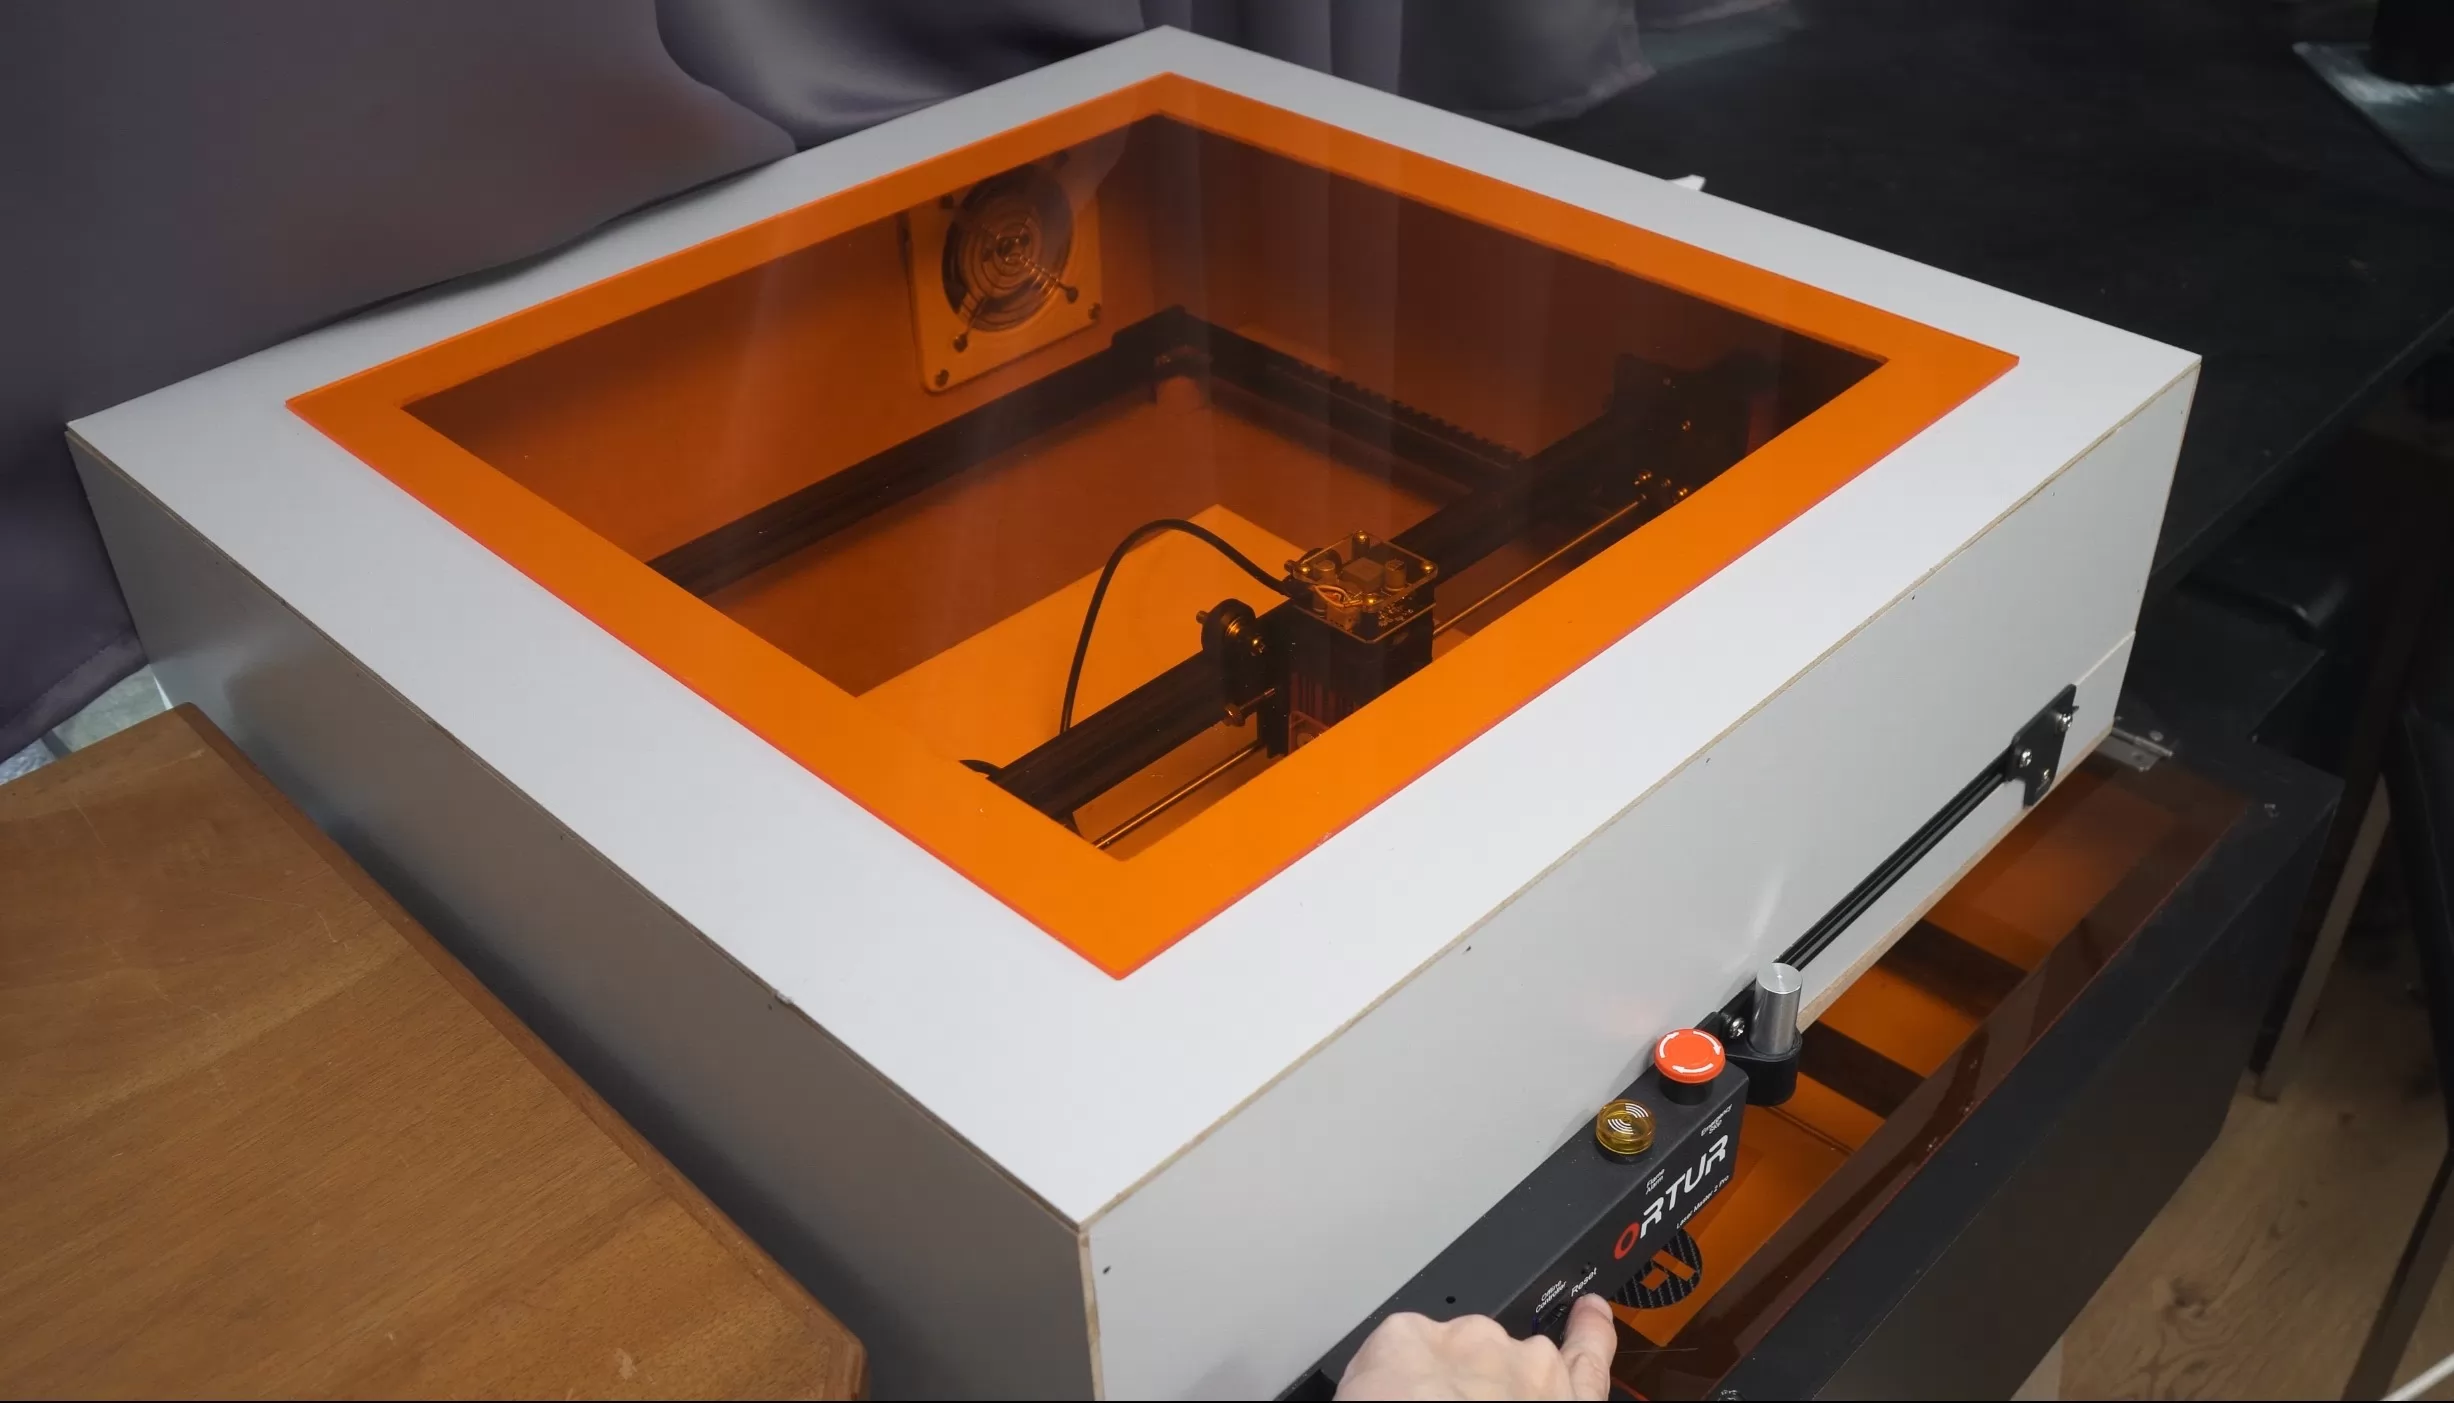 A very cheap and simple DIY enclosure for an engraving frame